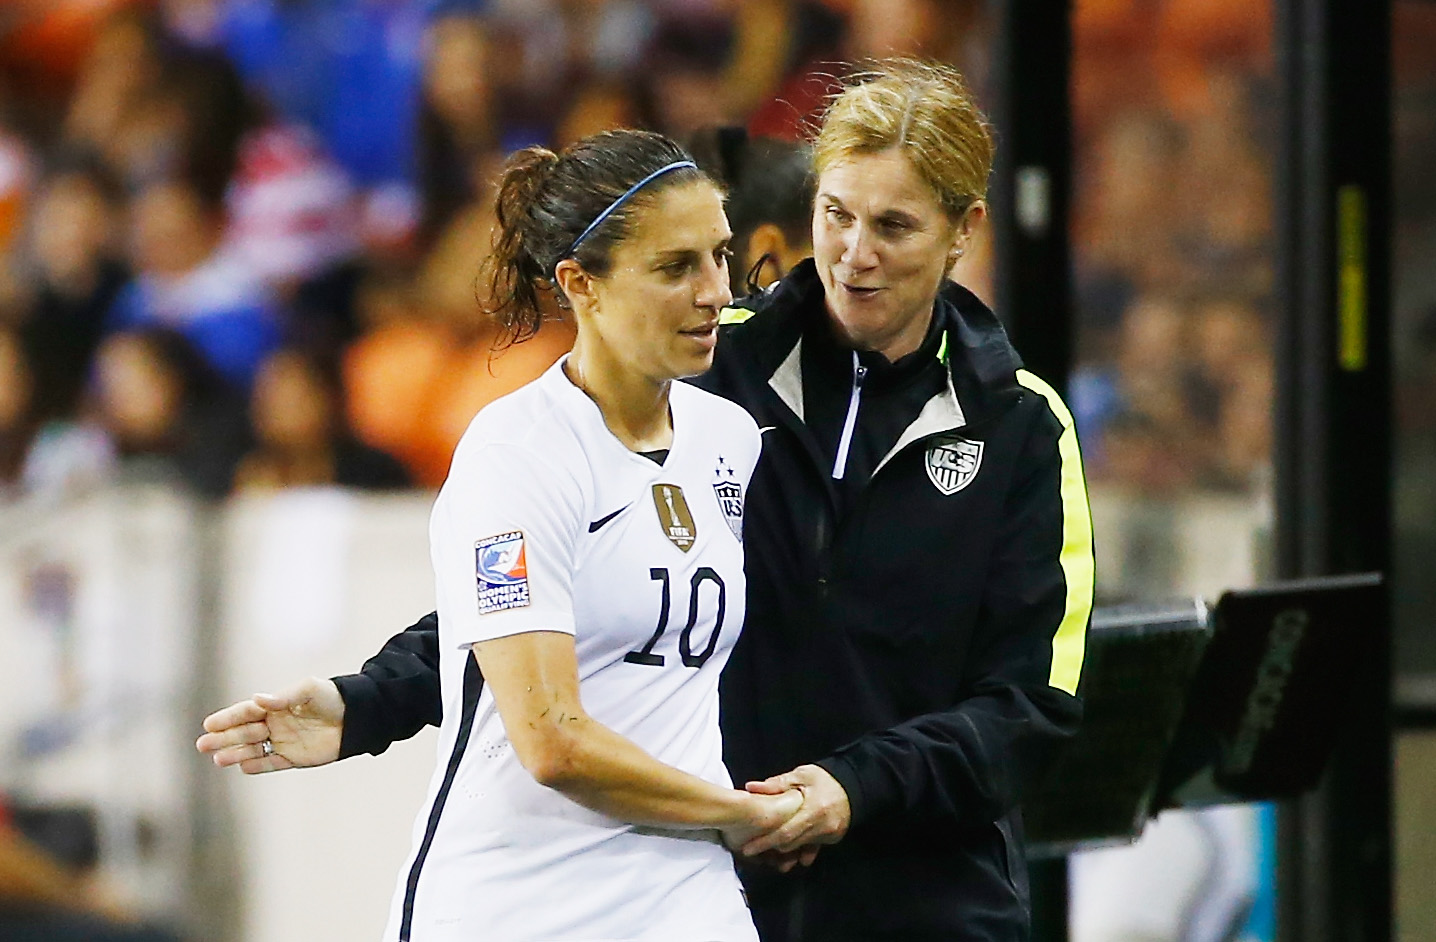 Delran, New Jersey native Carli Lloyd will lead the US against Colombia on April 10 at Talen Energy Stadium.